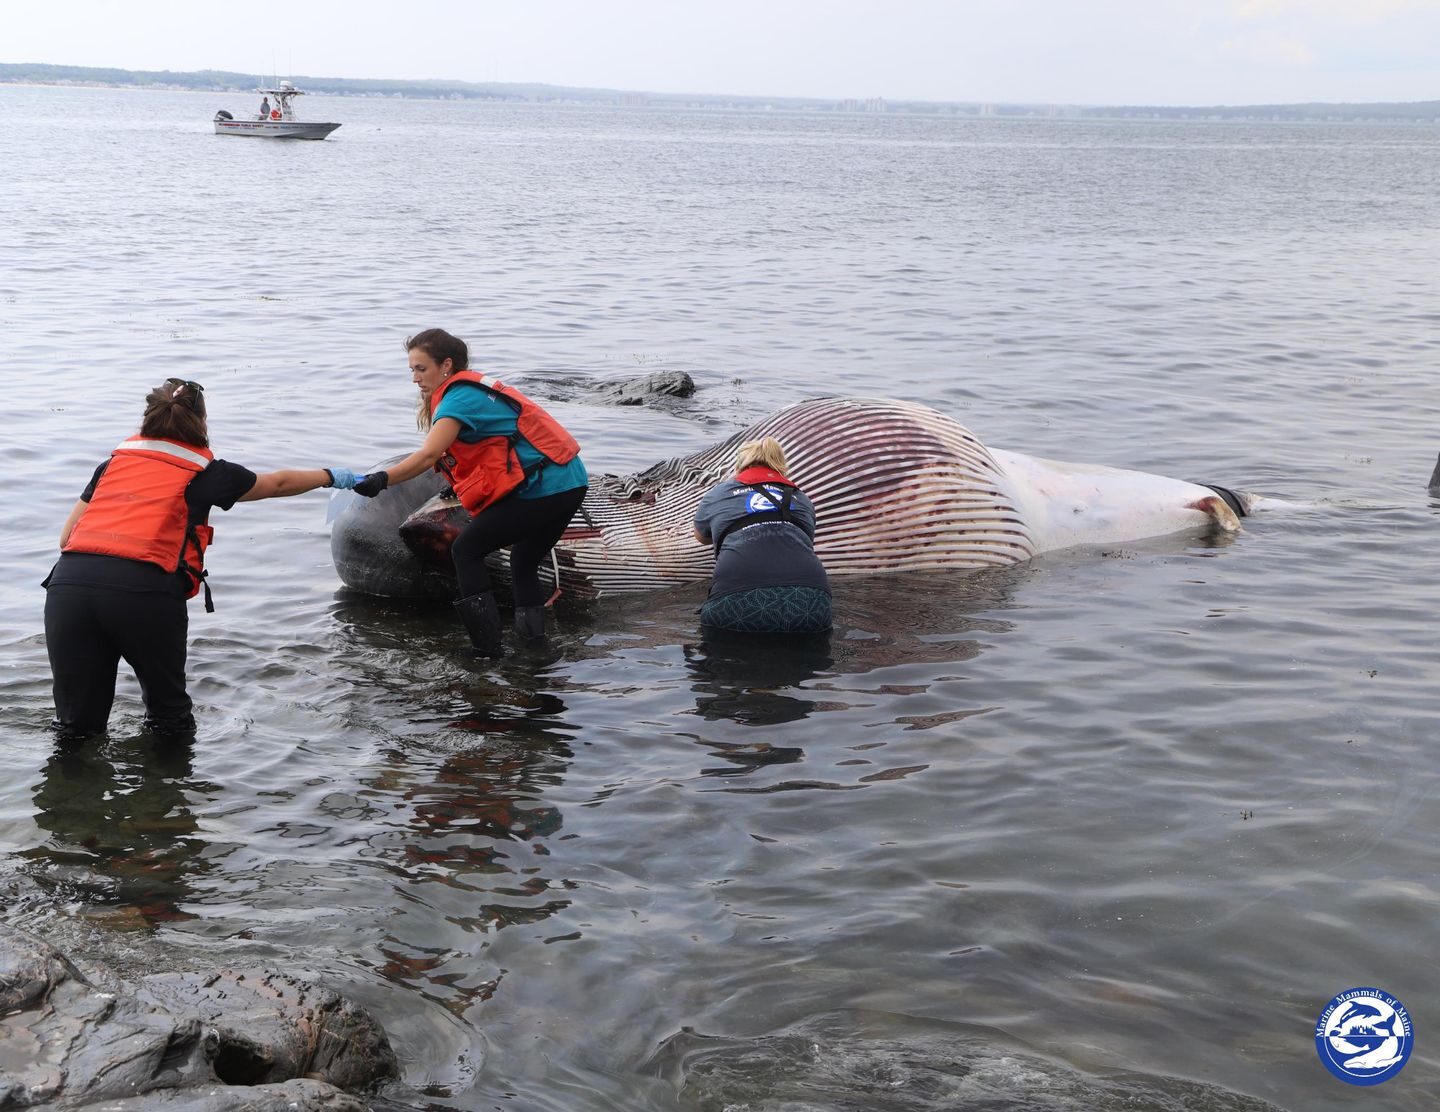 A 4,000 pound minke whale was found dead off the coast of Maine Saturday. Researchers from Marine Mammals of Maine are still working to determine what killed it.